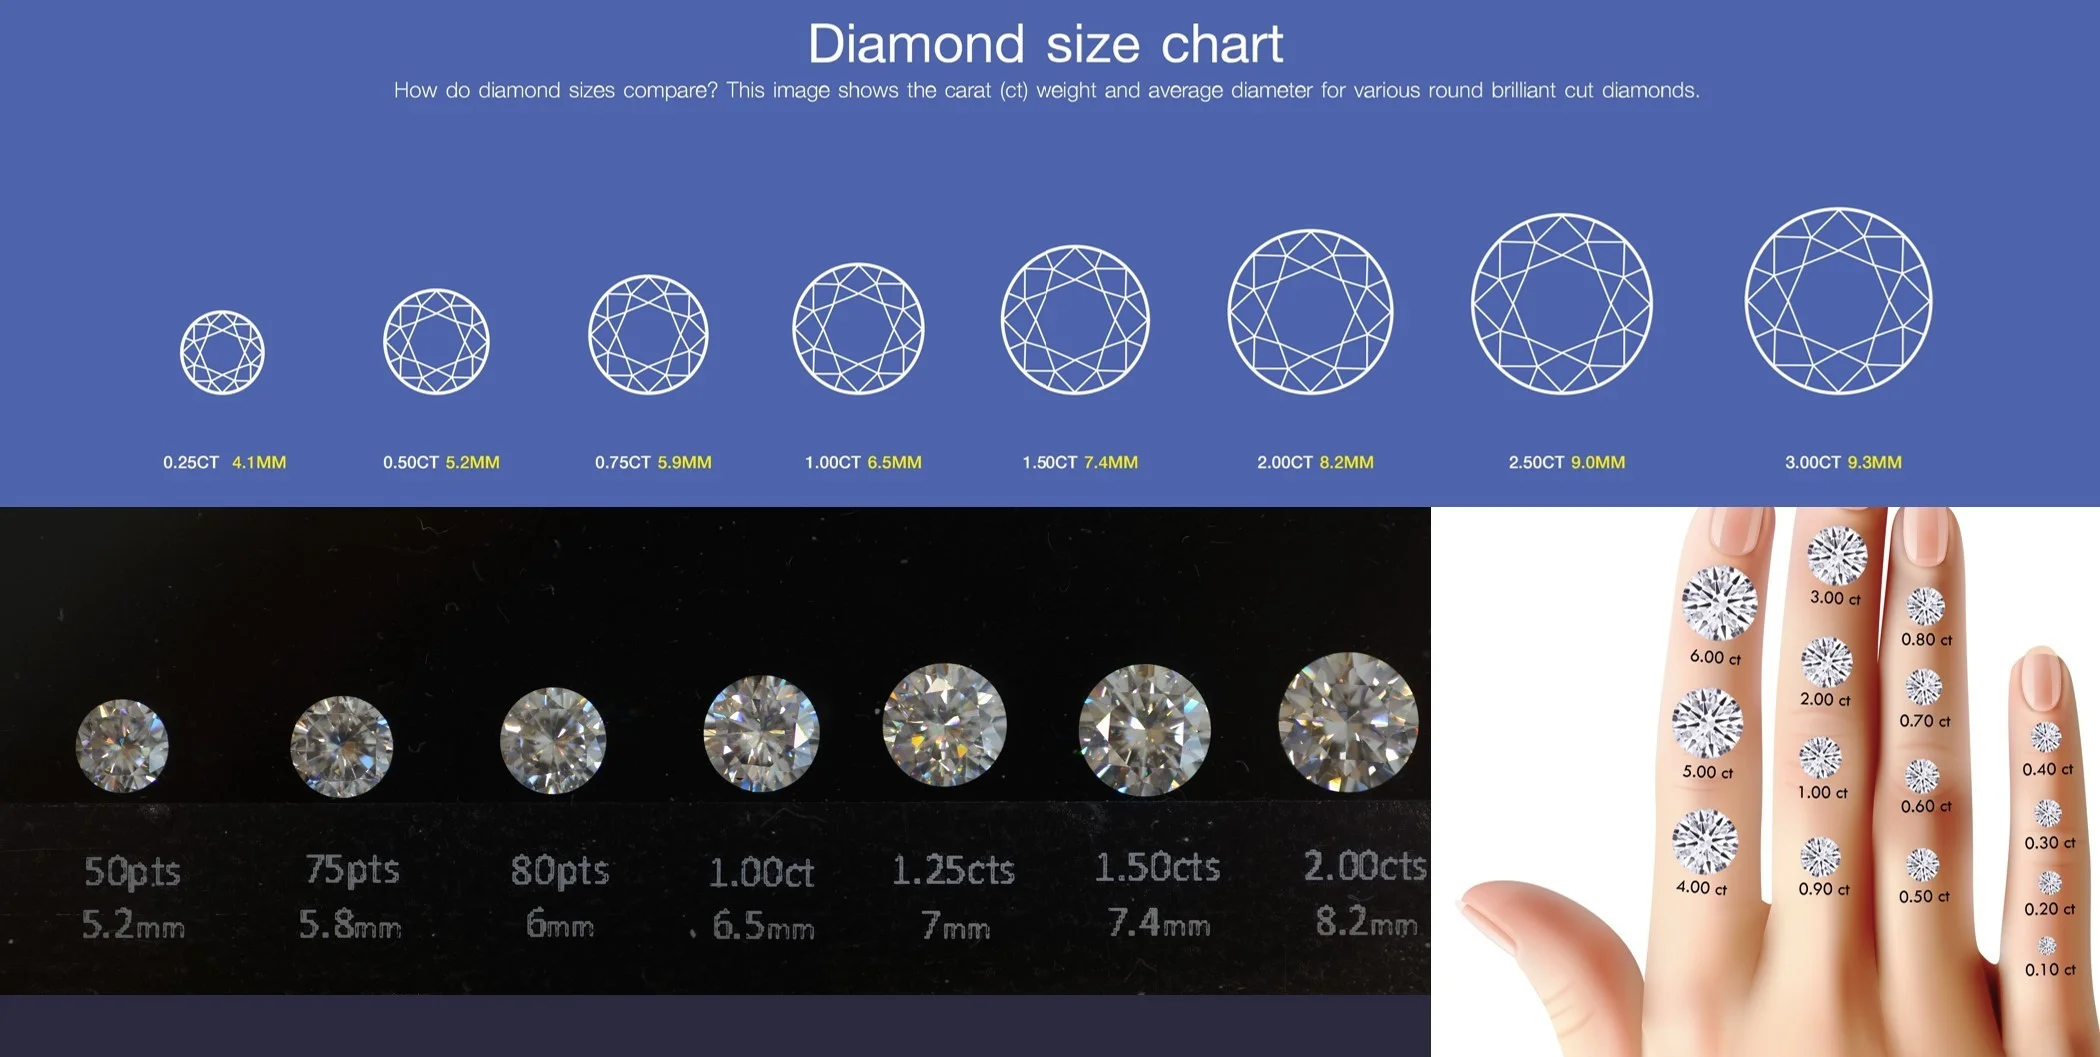 Diamond Carat Weight & How to Calculate it in Grams